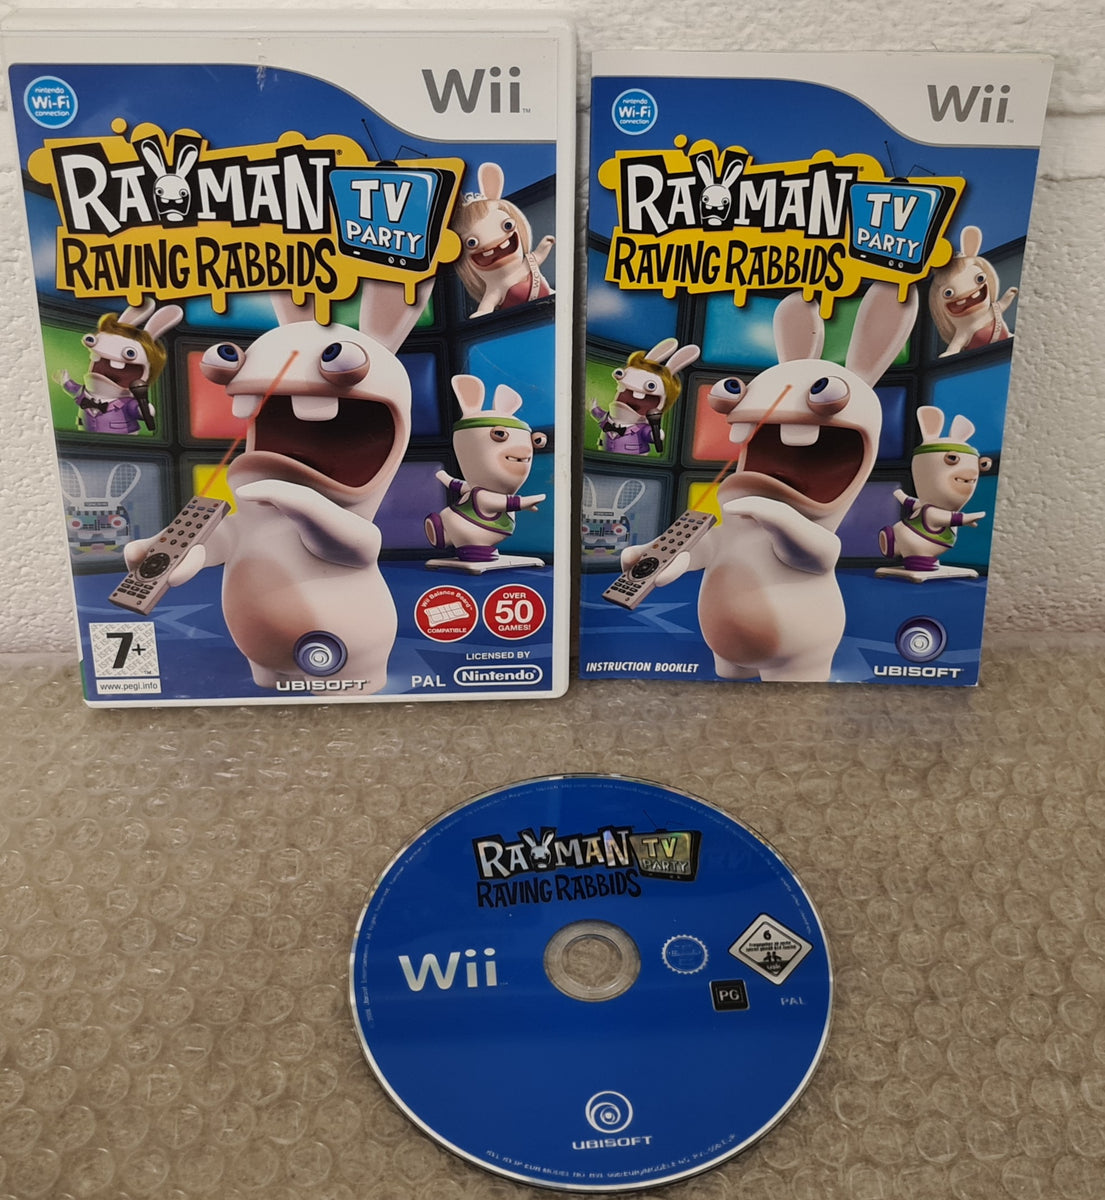 wii game rayman raving rabbids tv party